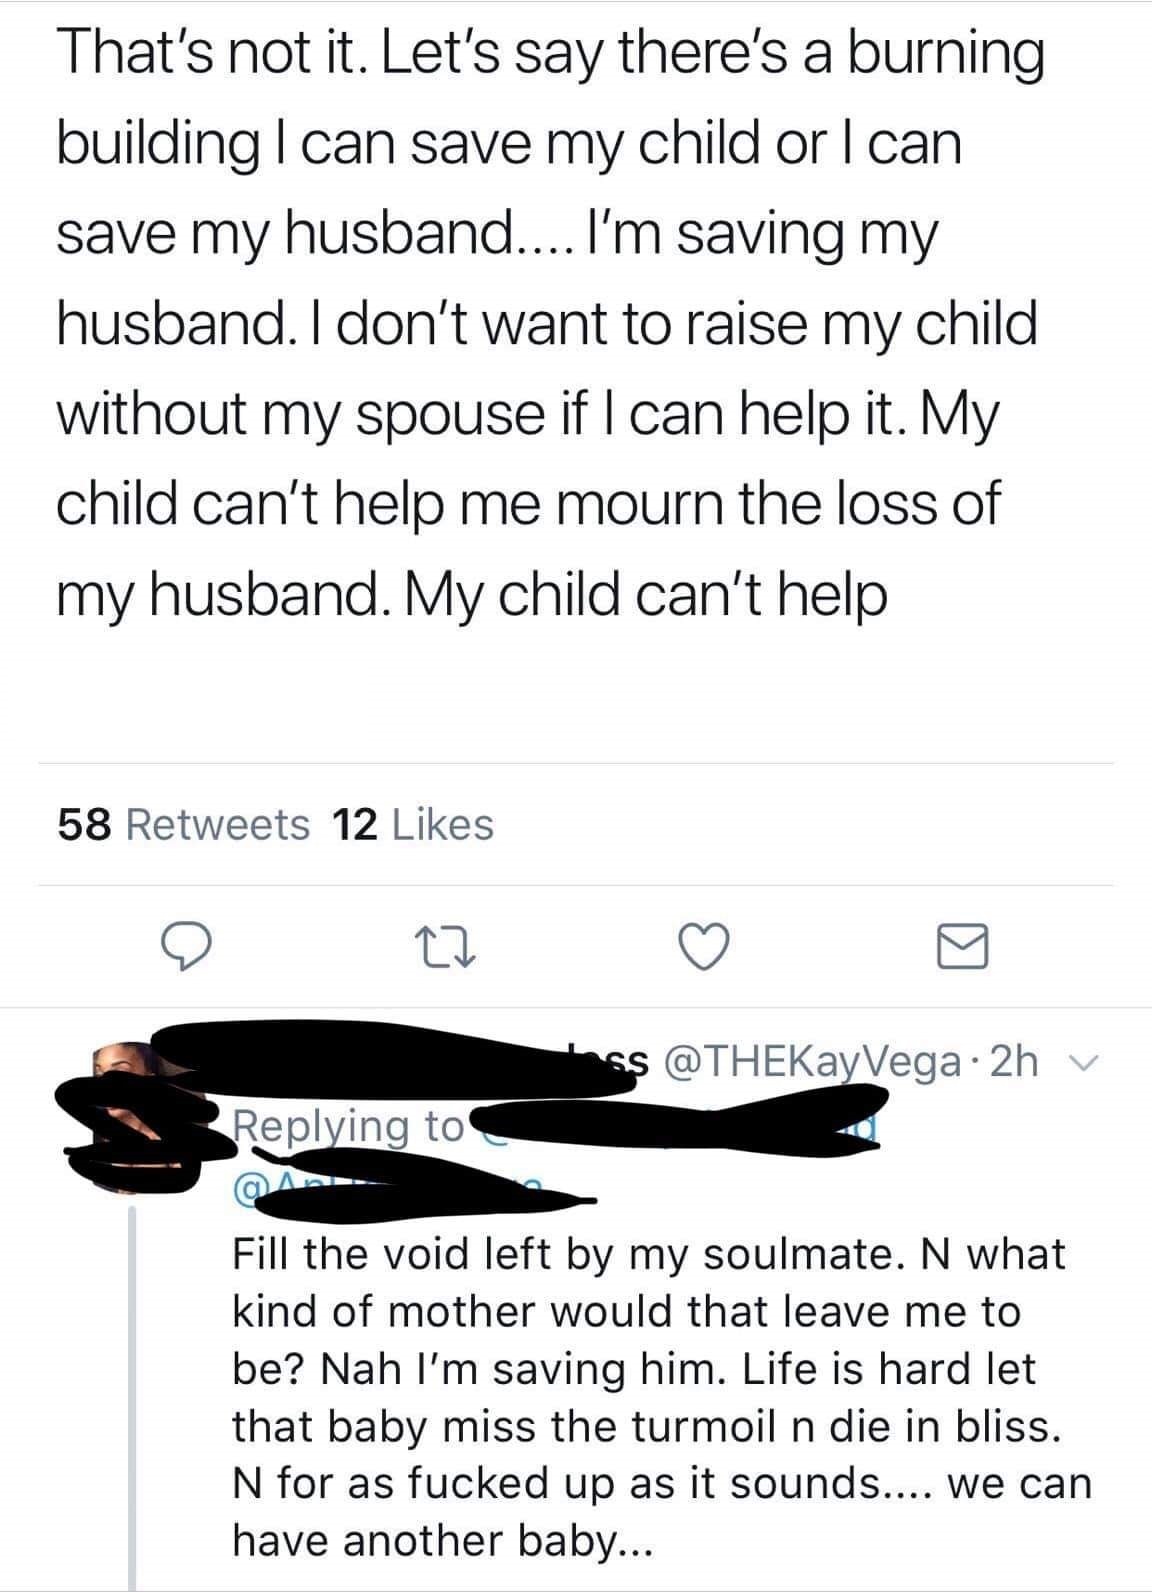 That's not it. Let's say there's a burning building I can save my child or I can save my husband.... I'm saving my husband. I don't want to raise my child without my spouse if I can help it. My child can't help me mourn the loss of my husband. My child…